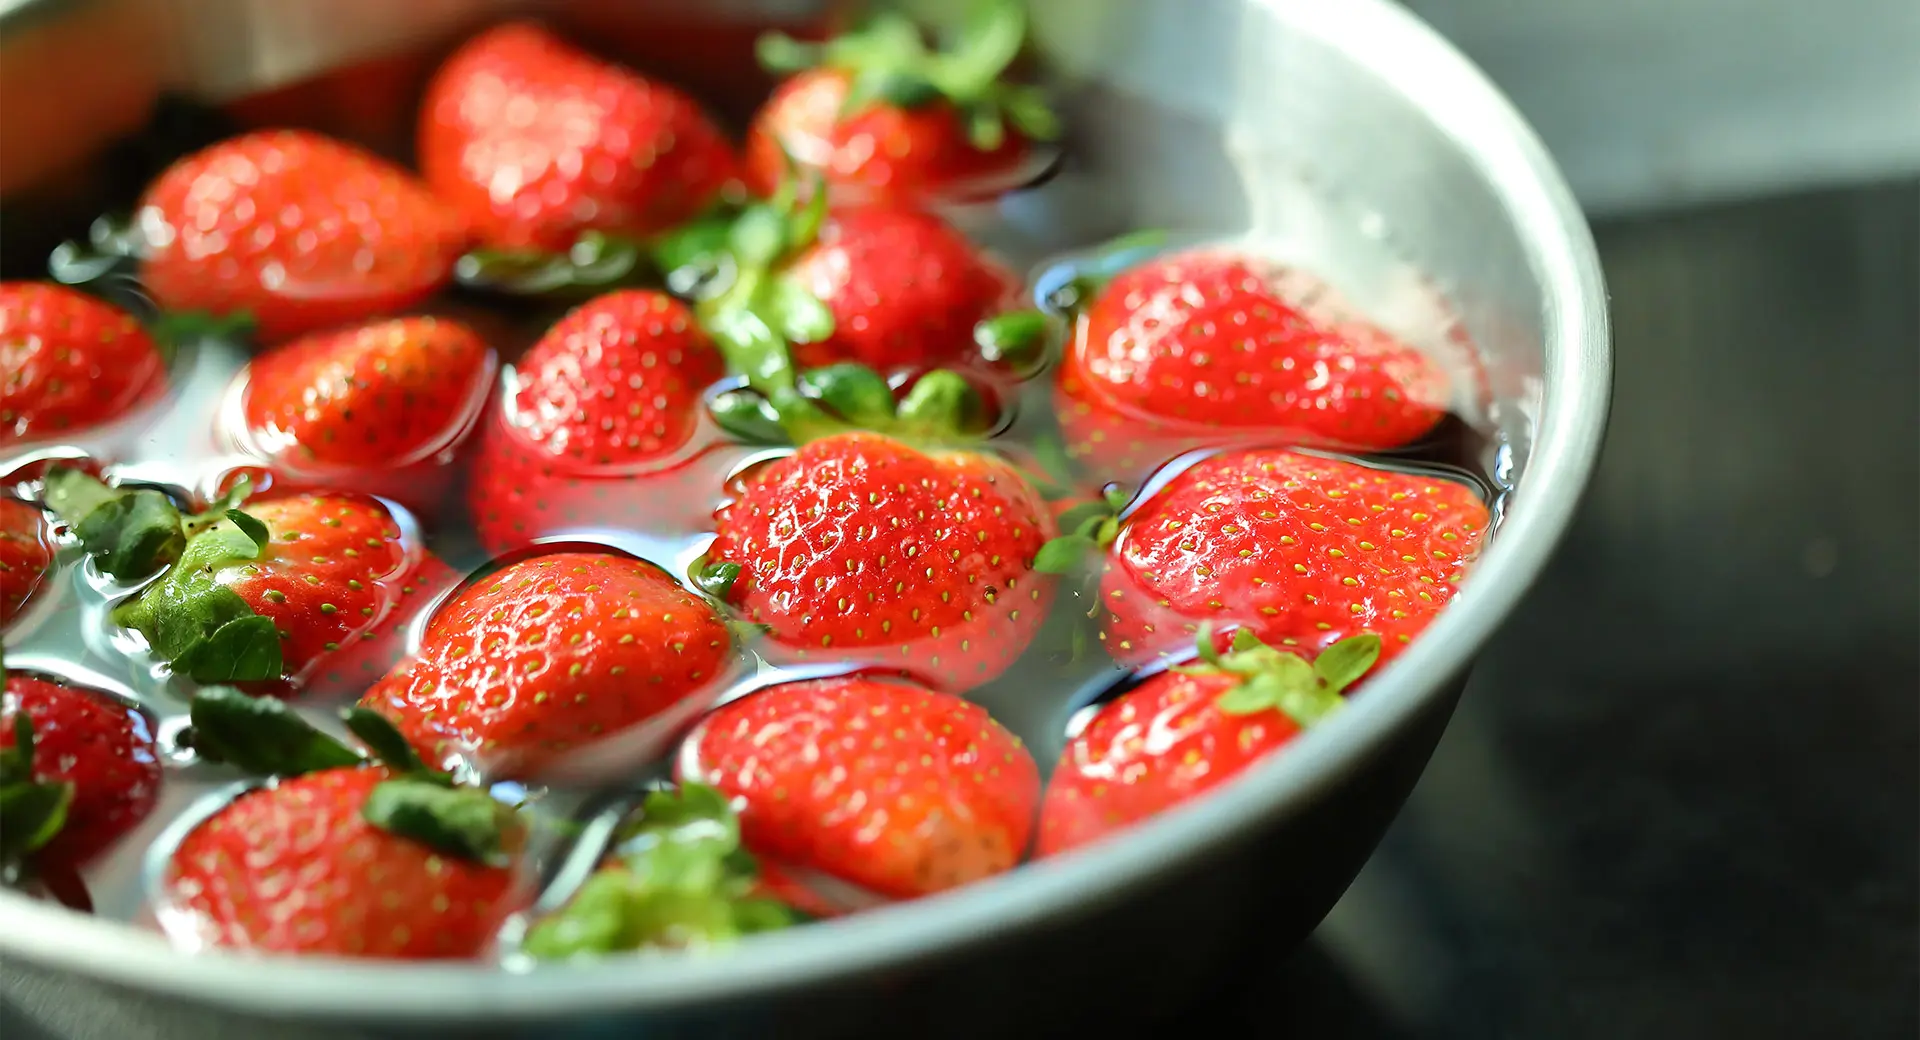 Fresh strawberries being washed in water